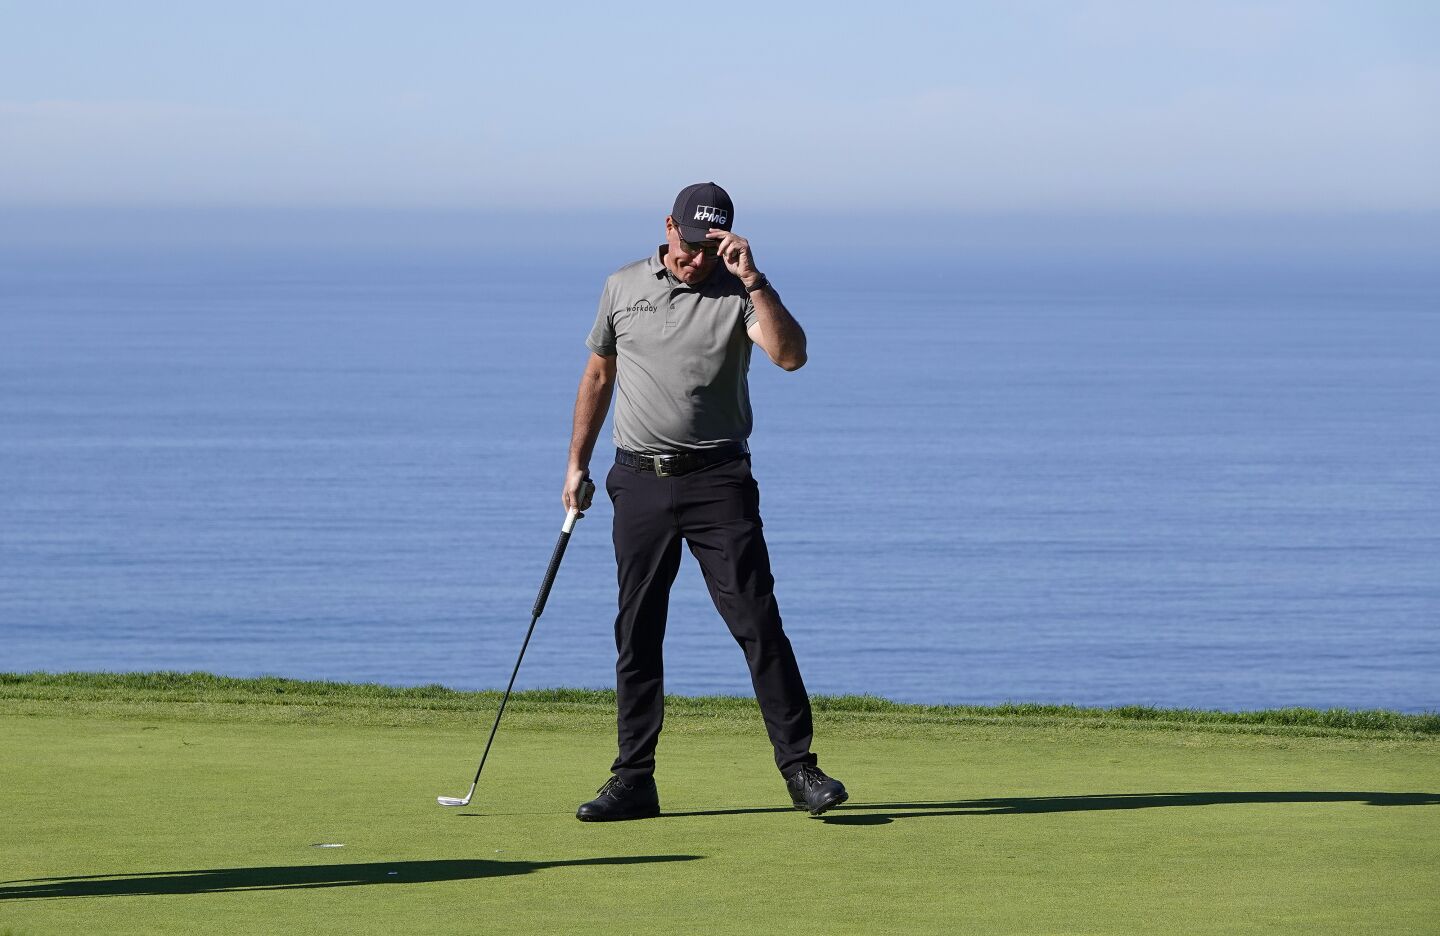 Phil Mickelson sinks a putt on the fourth hole of Torrey Pines' South Course during the first round of the Farmers Insurance Open on Jan. 26.